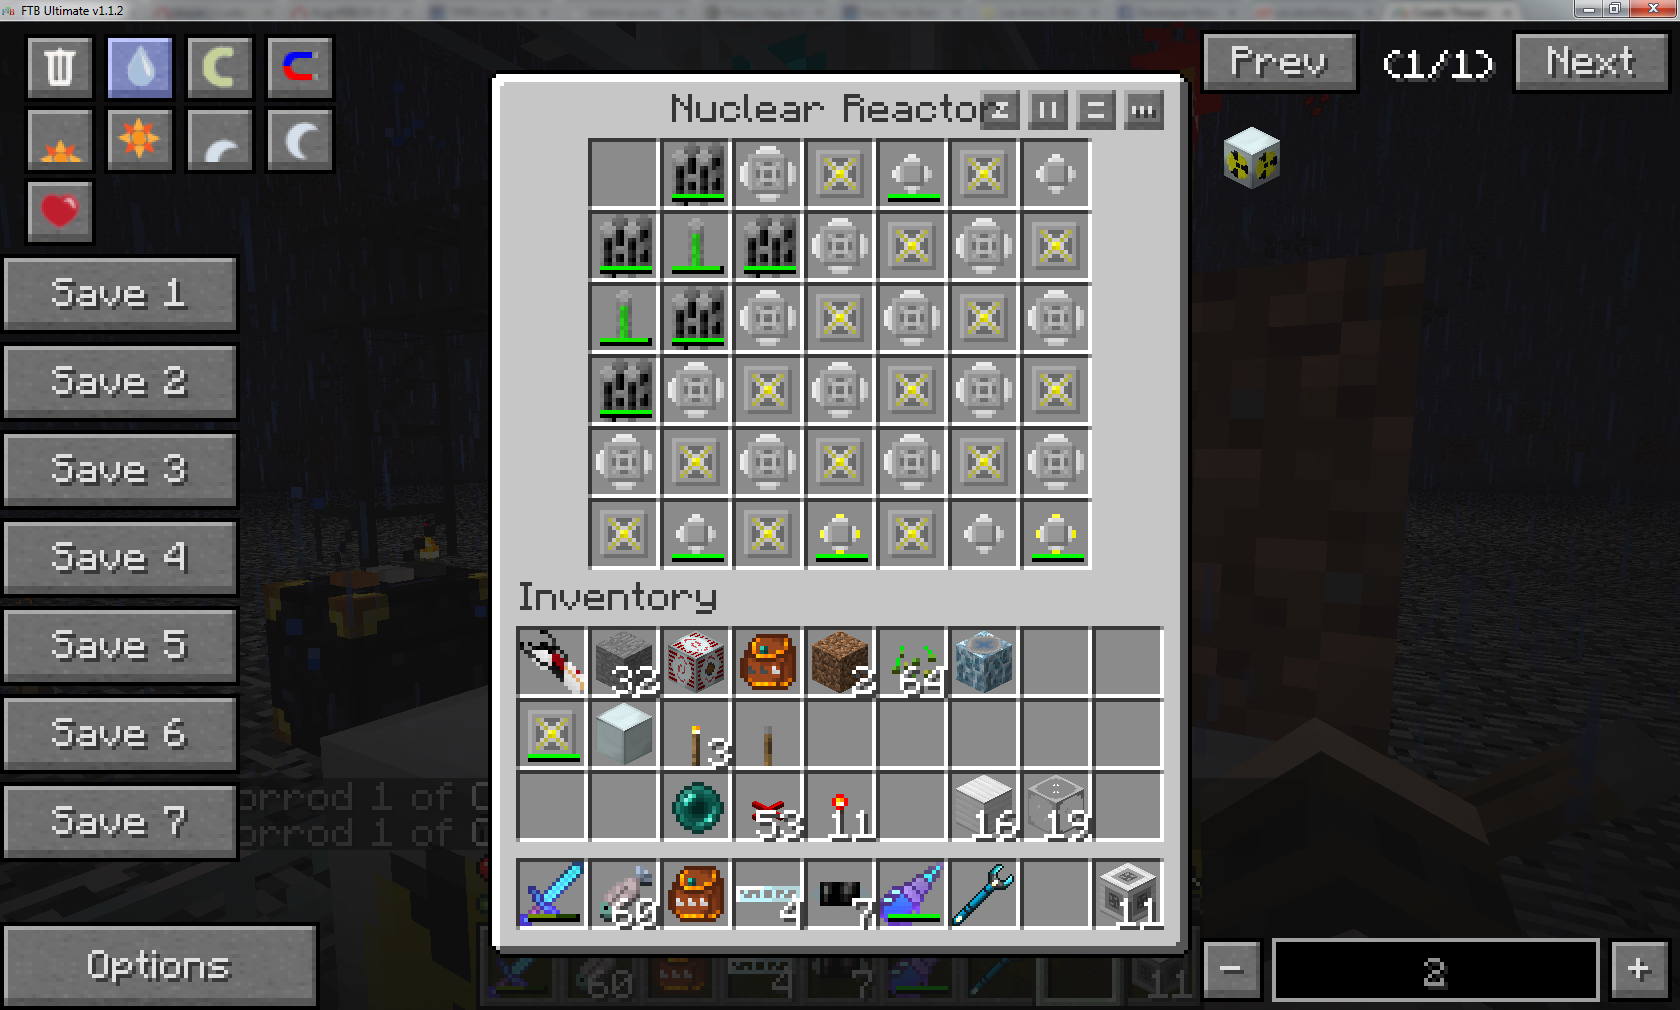 NuclearReactor2.png